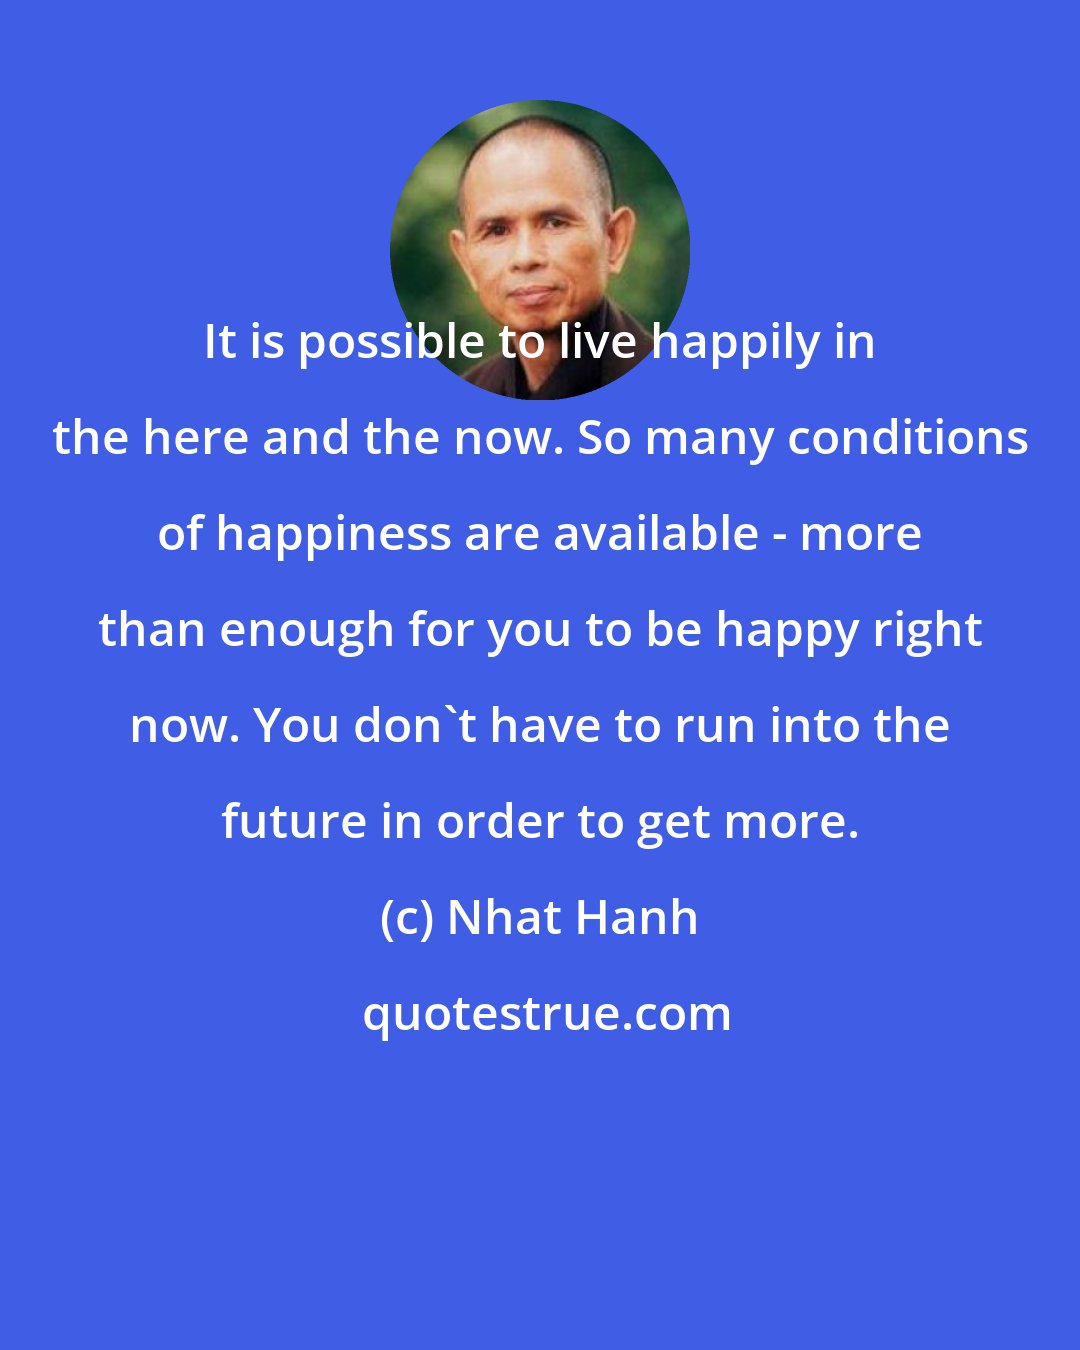 Nhat Hanh: It is possible to live happily in the here and the now. So many conditions of happiness are available - more than enough for you to be happy right now. You don't have to run into the future in order to get more.